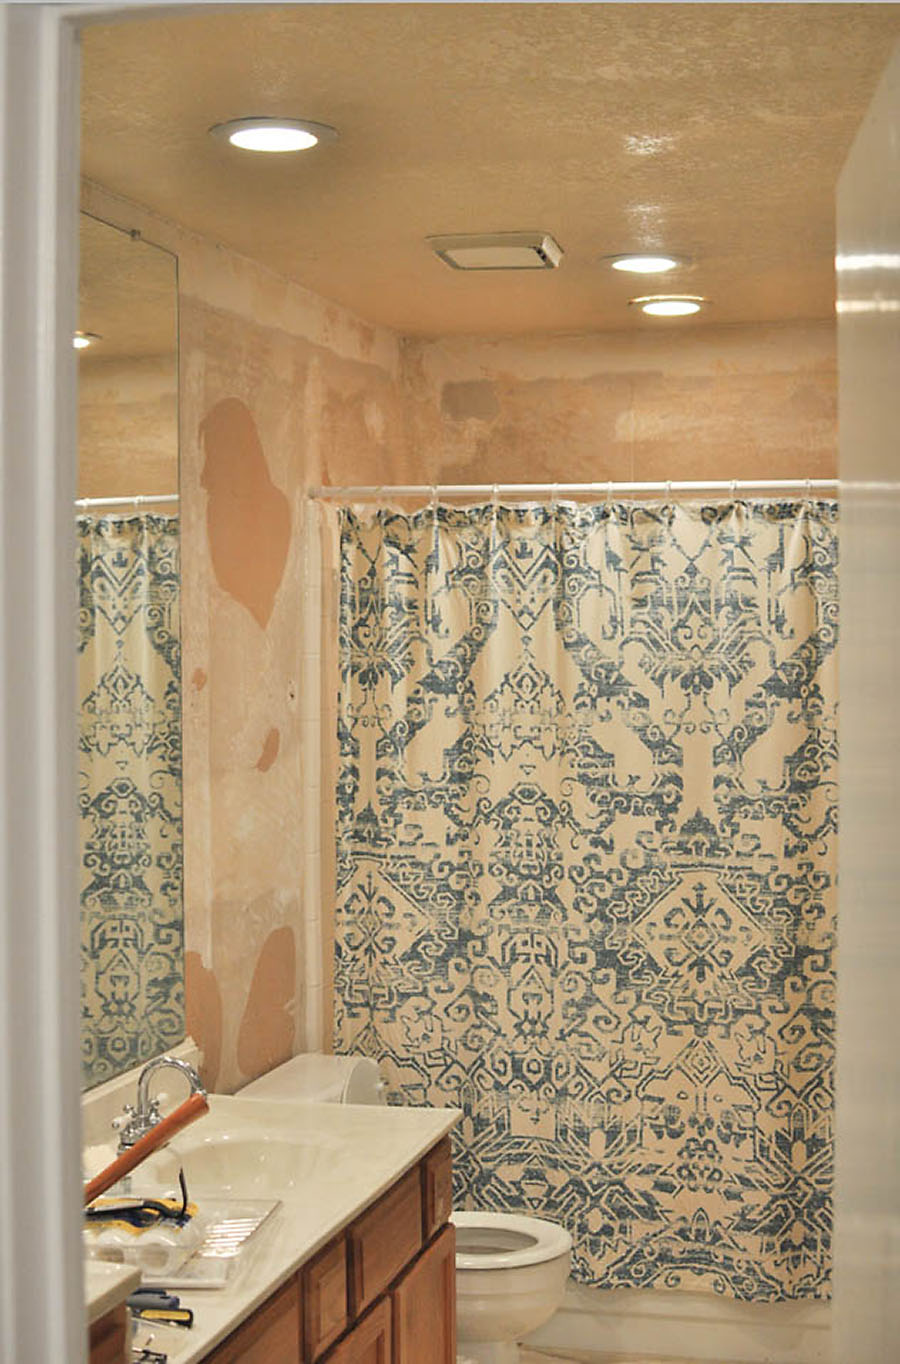 Bathroom Remodel: Exciting Walk-In Shower Ideas